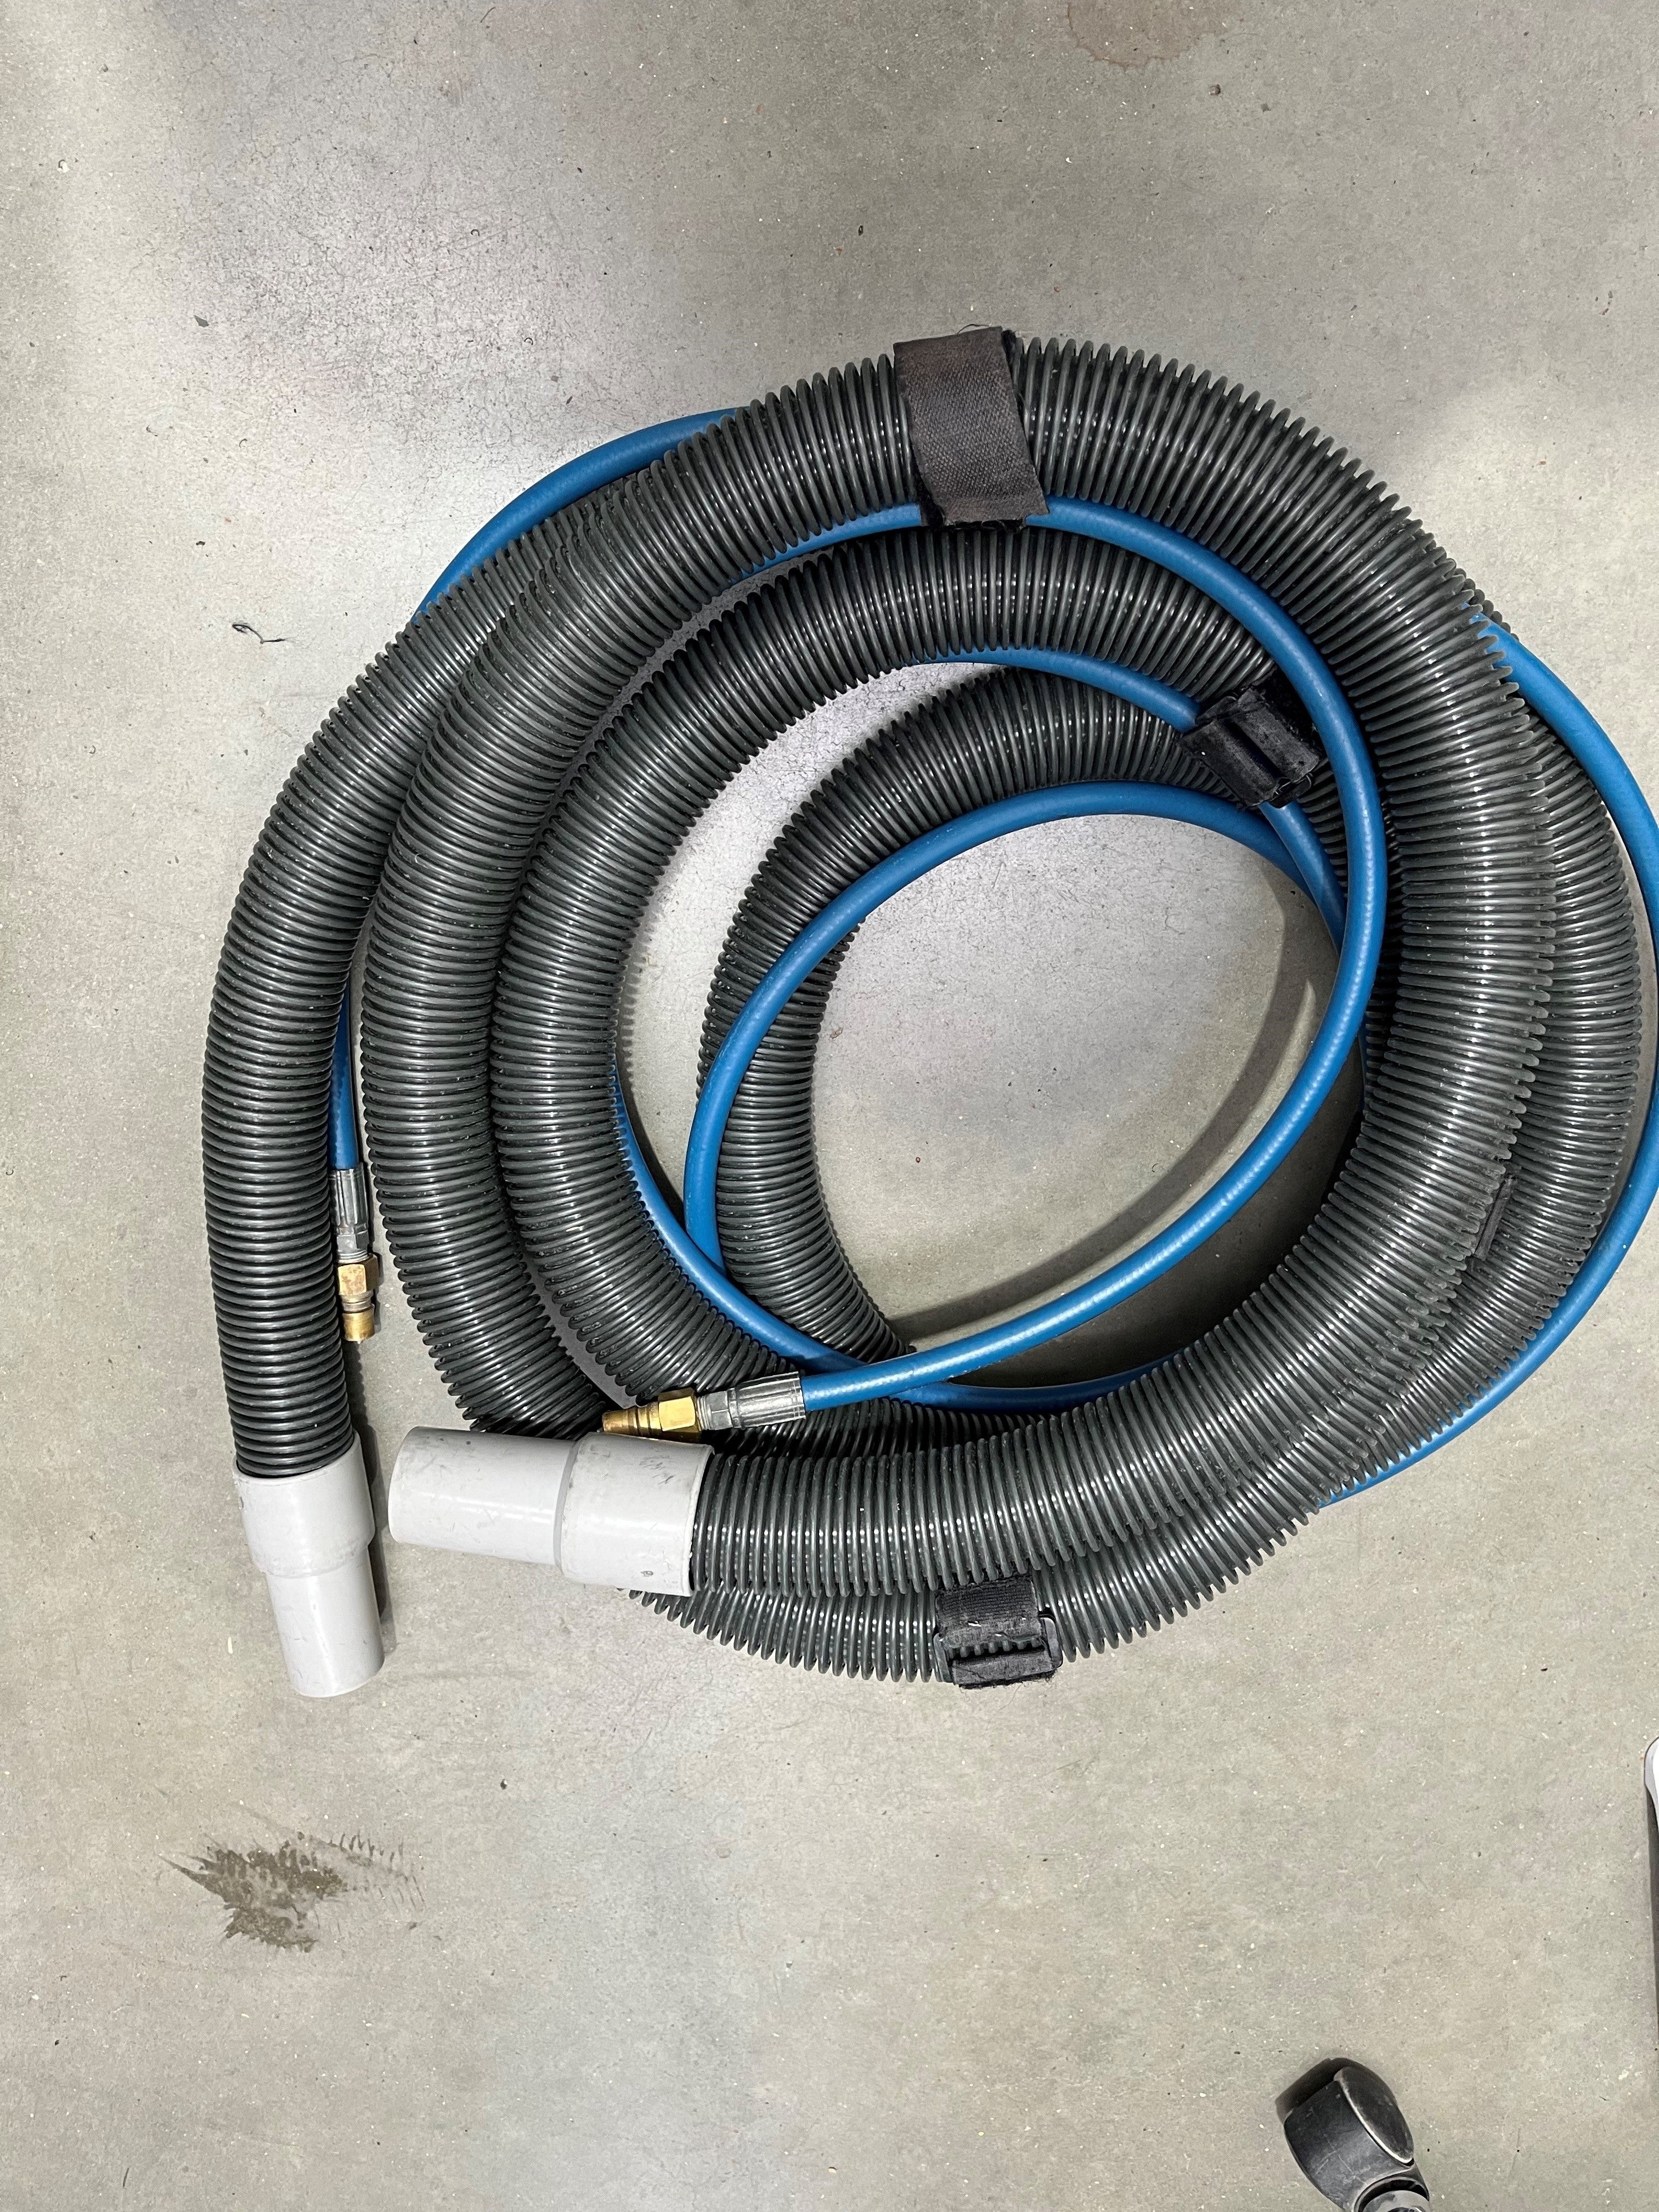 Prochem Used 5mtr Vac & High Pressure Hose for Galaxy Carpet Cleaner